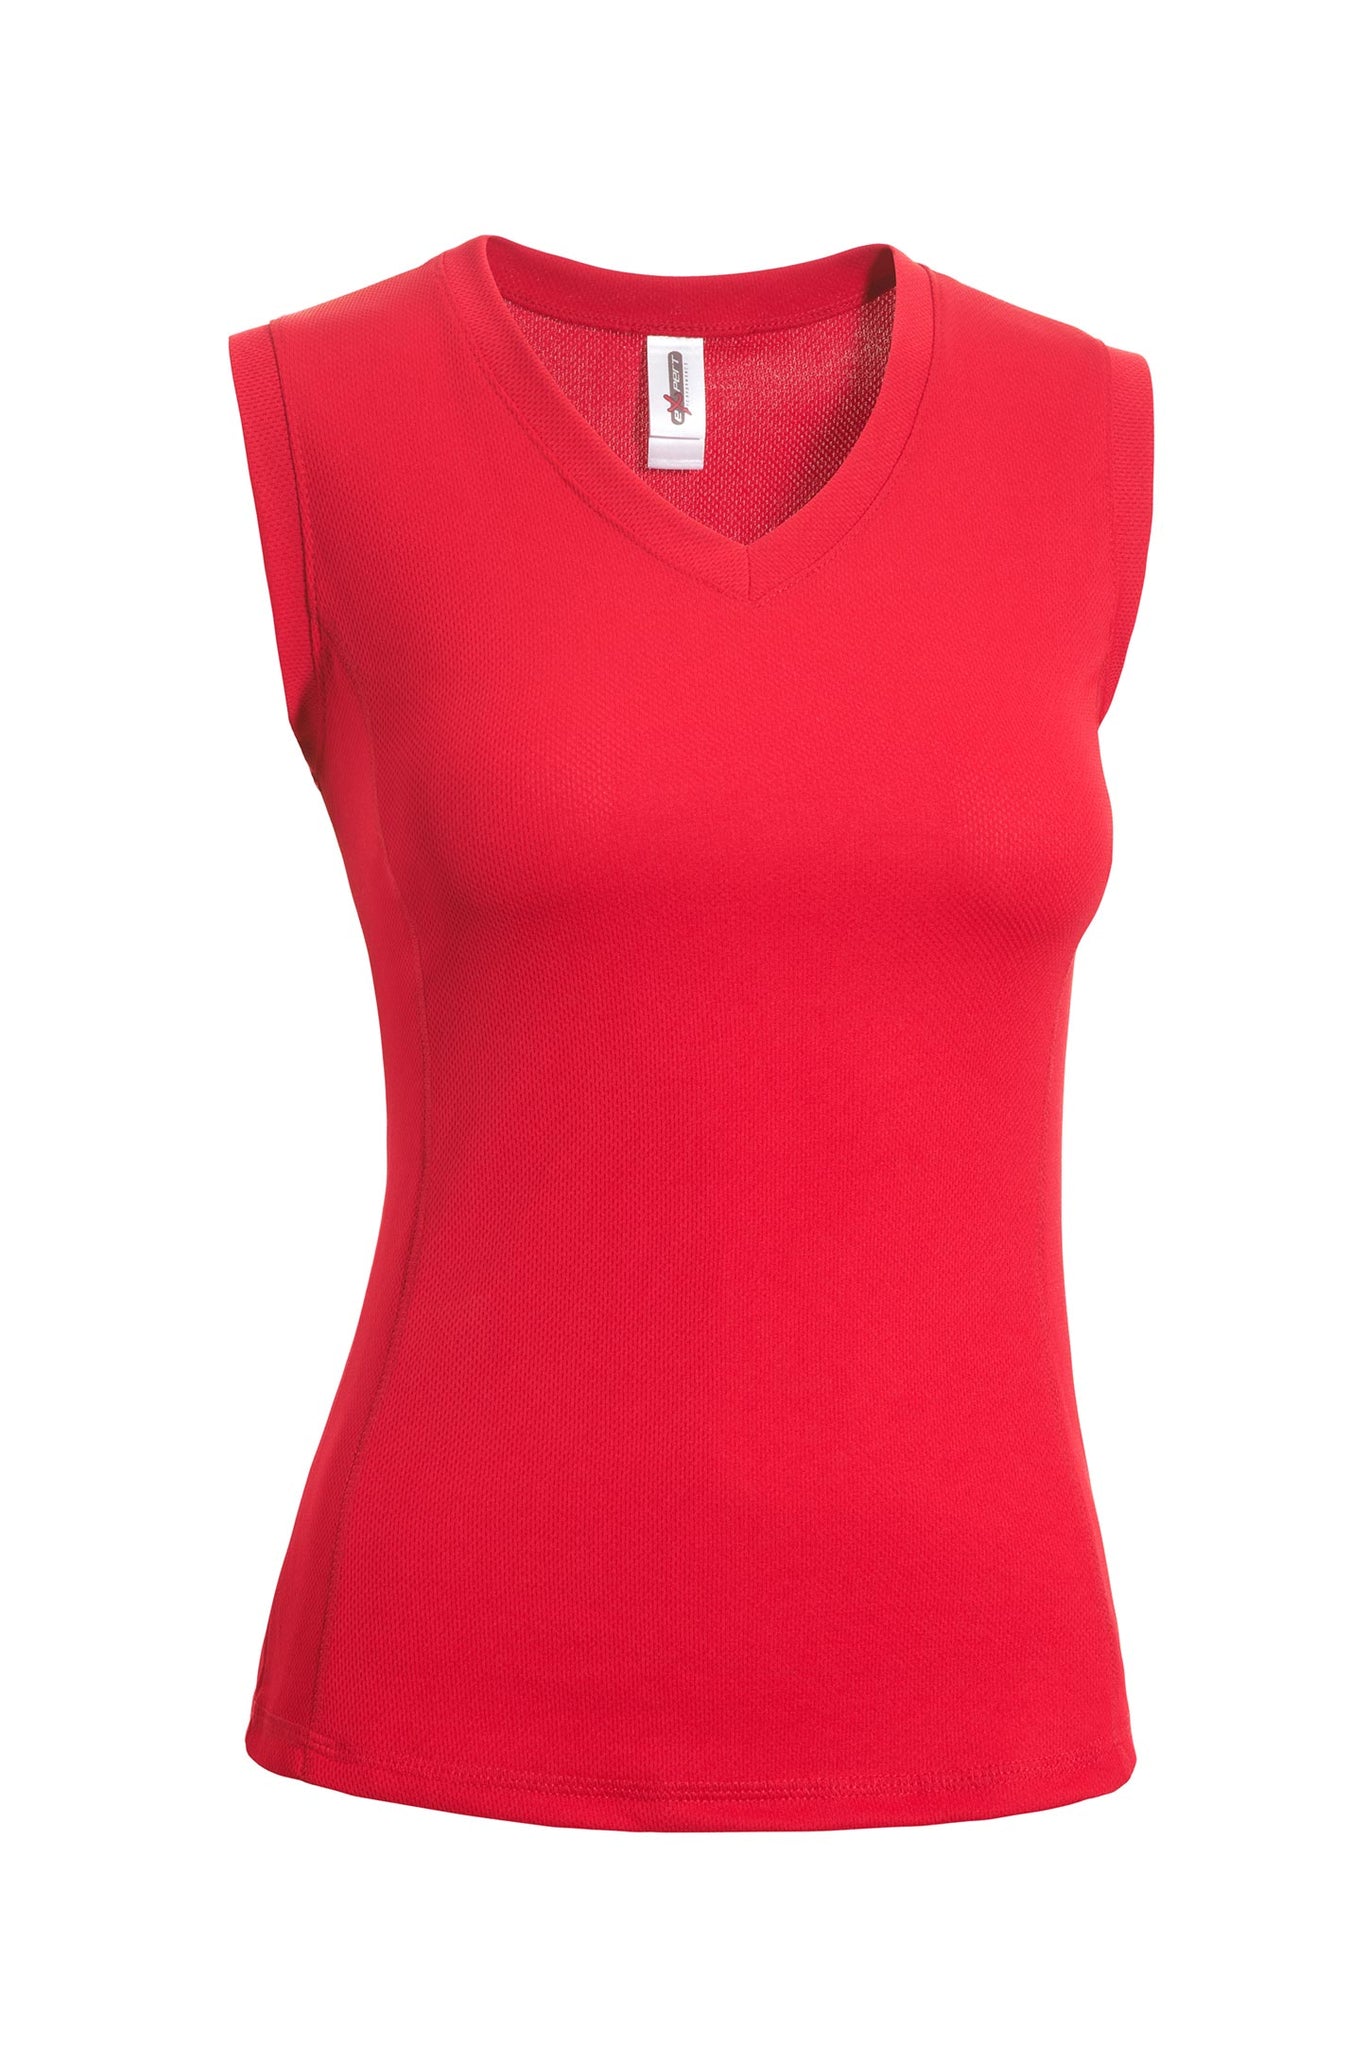 Expert Brand Wholesale Women's Oxymesh™ Workout Tank Red#red